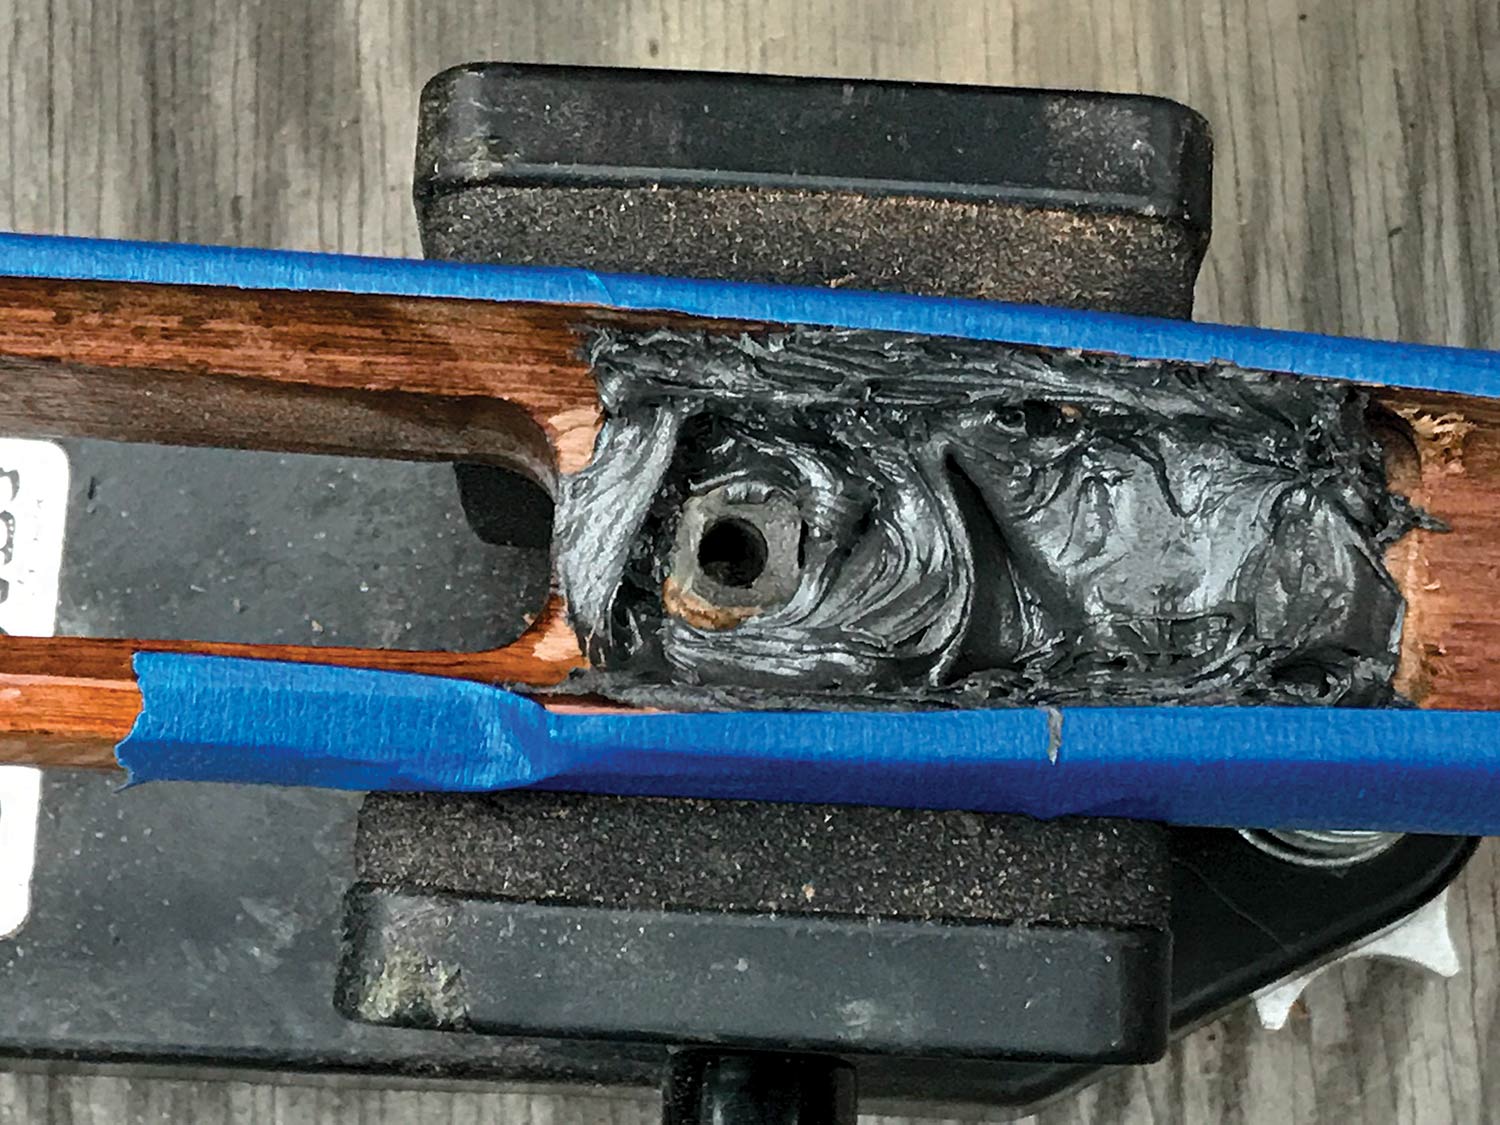 A rifle stock wrapped in blue tape.